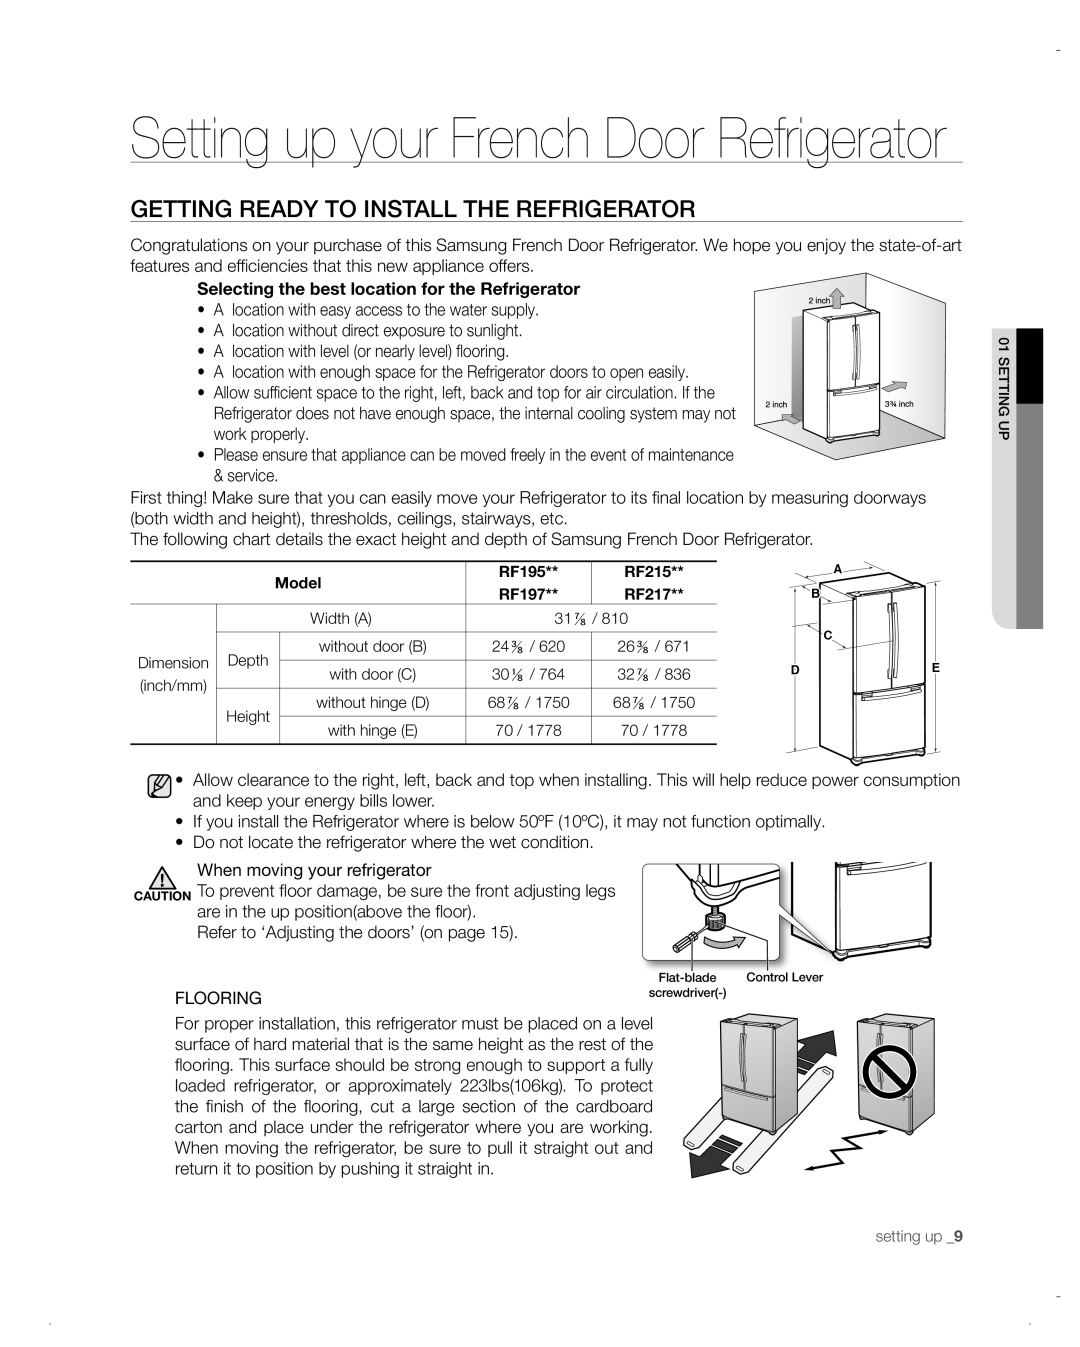 Samsung RF197ACPN, RF197ACBP, RF217ACWP Getting Ready To Install The Refrigerator, Setting up your French Door Refrigerator 